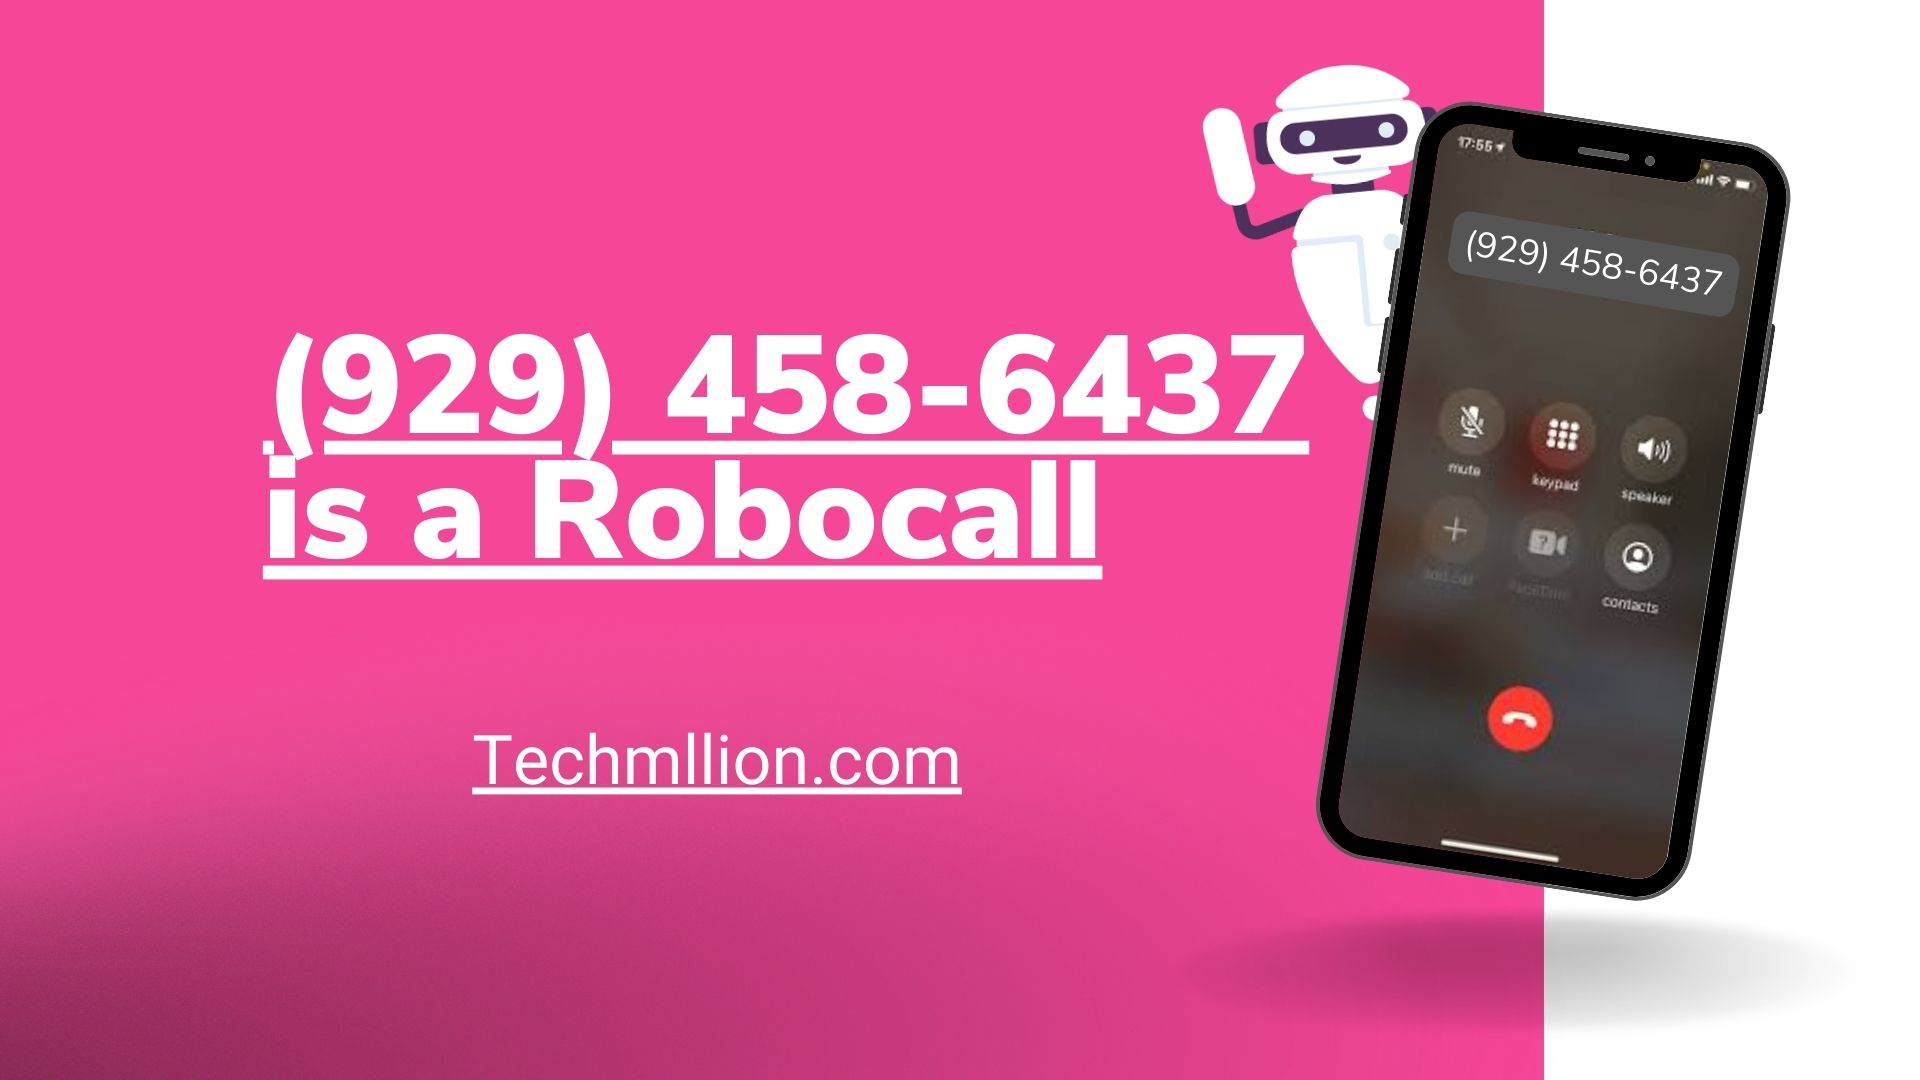 (929) 458-6437 is a Robocall